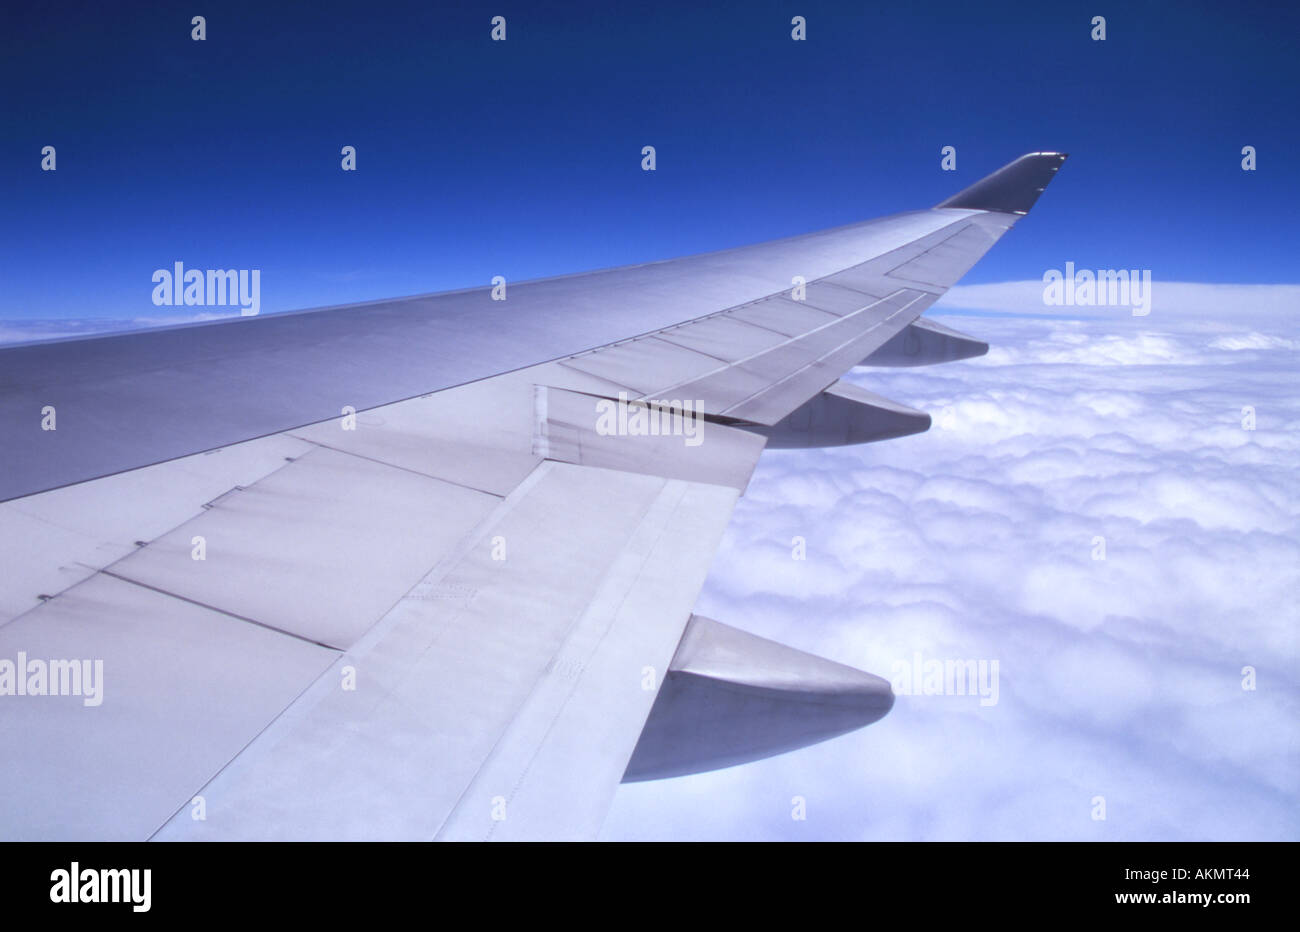 Airplane Wing on Boeing 747 Stock Photo